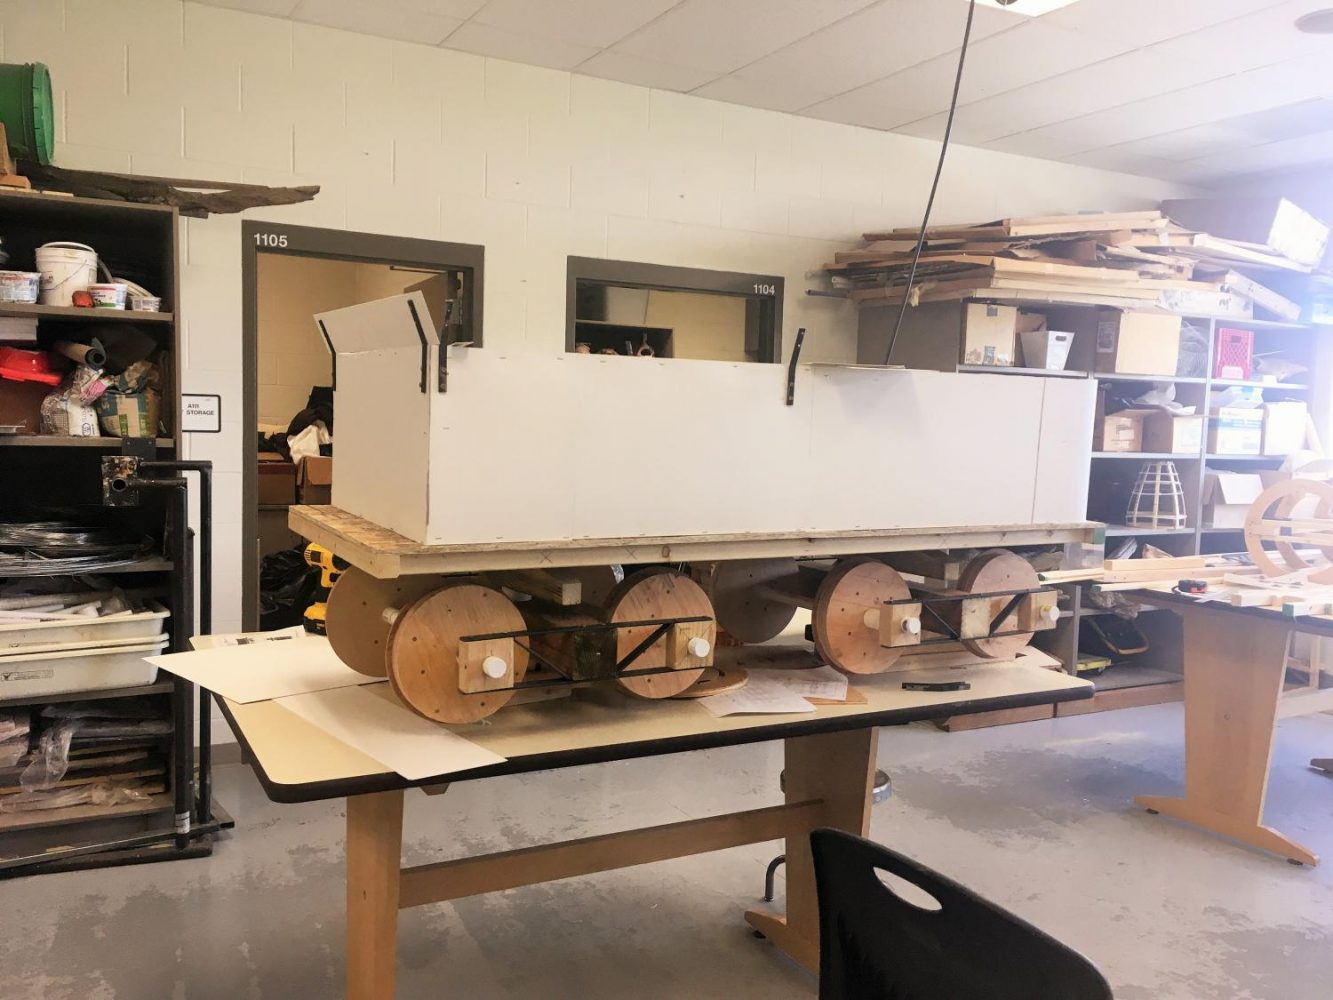 The locomotive tender car is currently under construction in the art room. It will be a key component in this years art project.